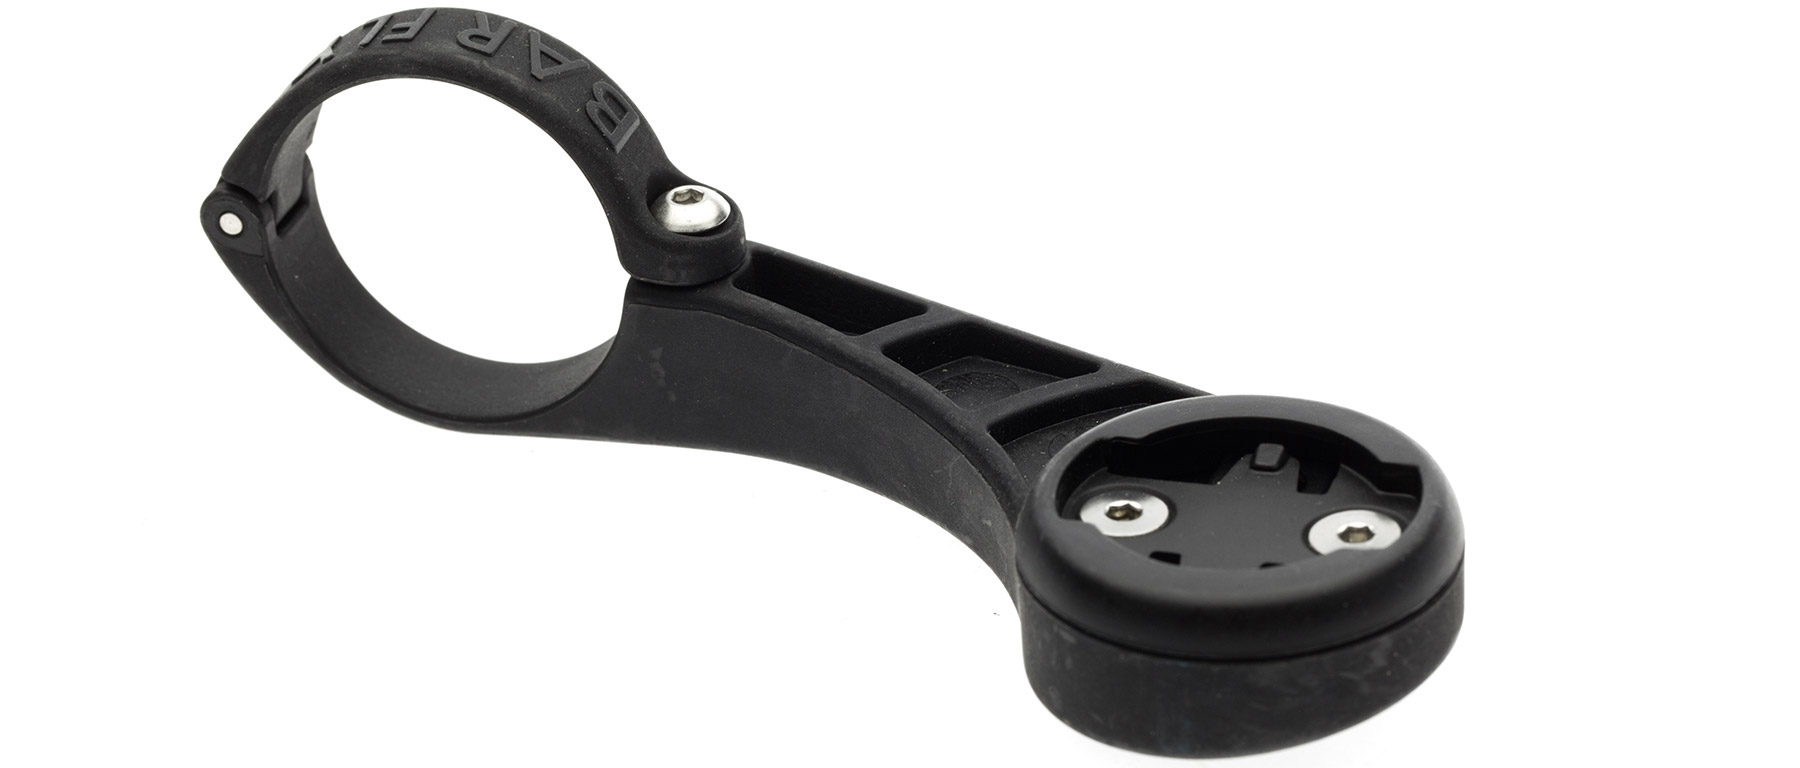 Bar Fly 4 Max Mount